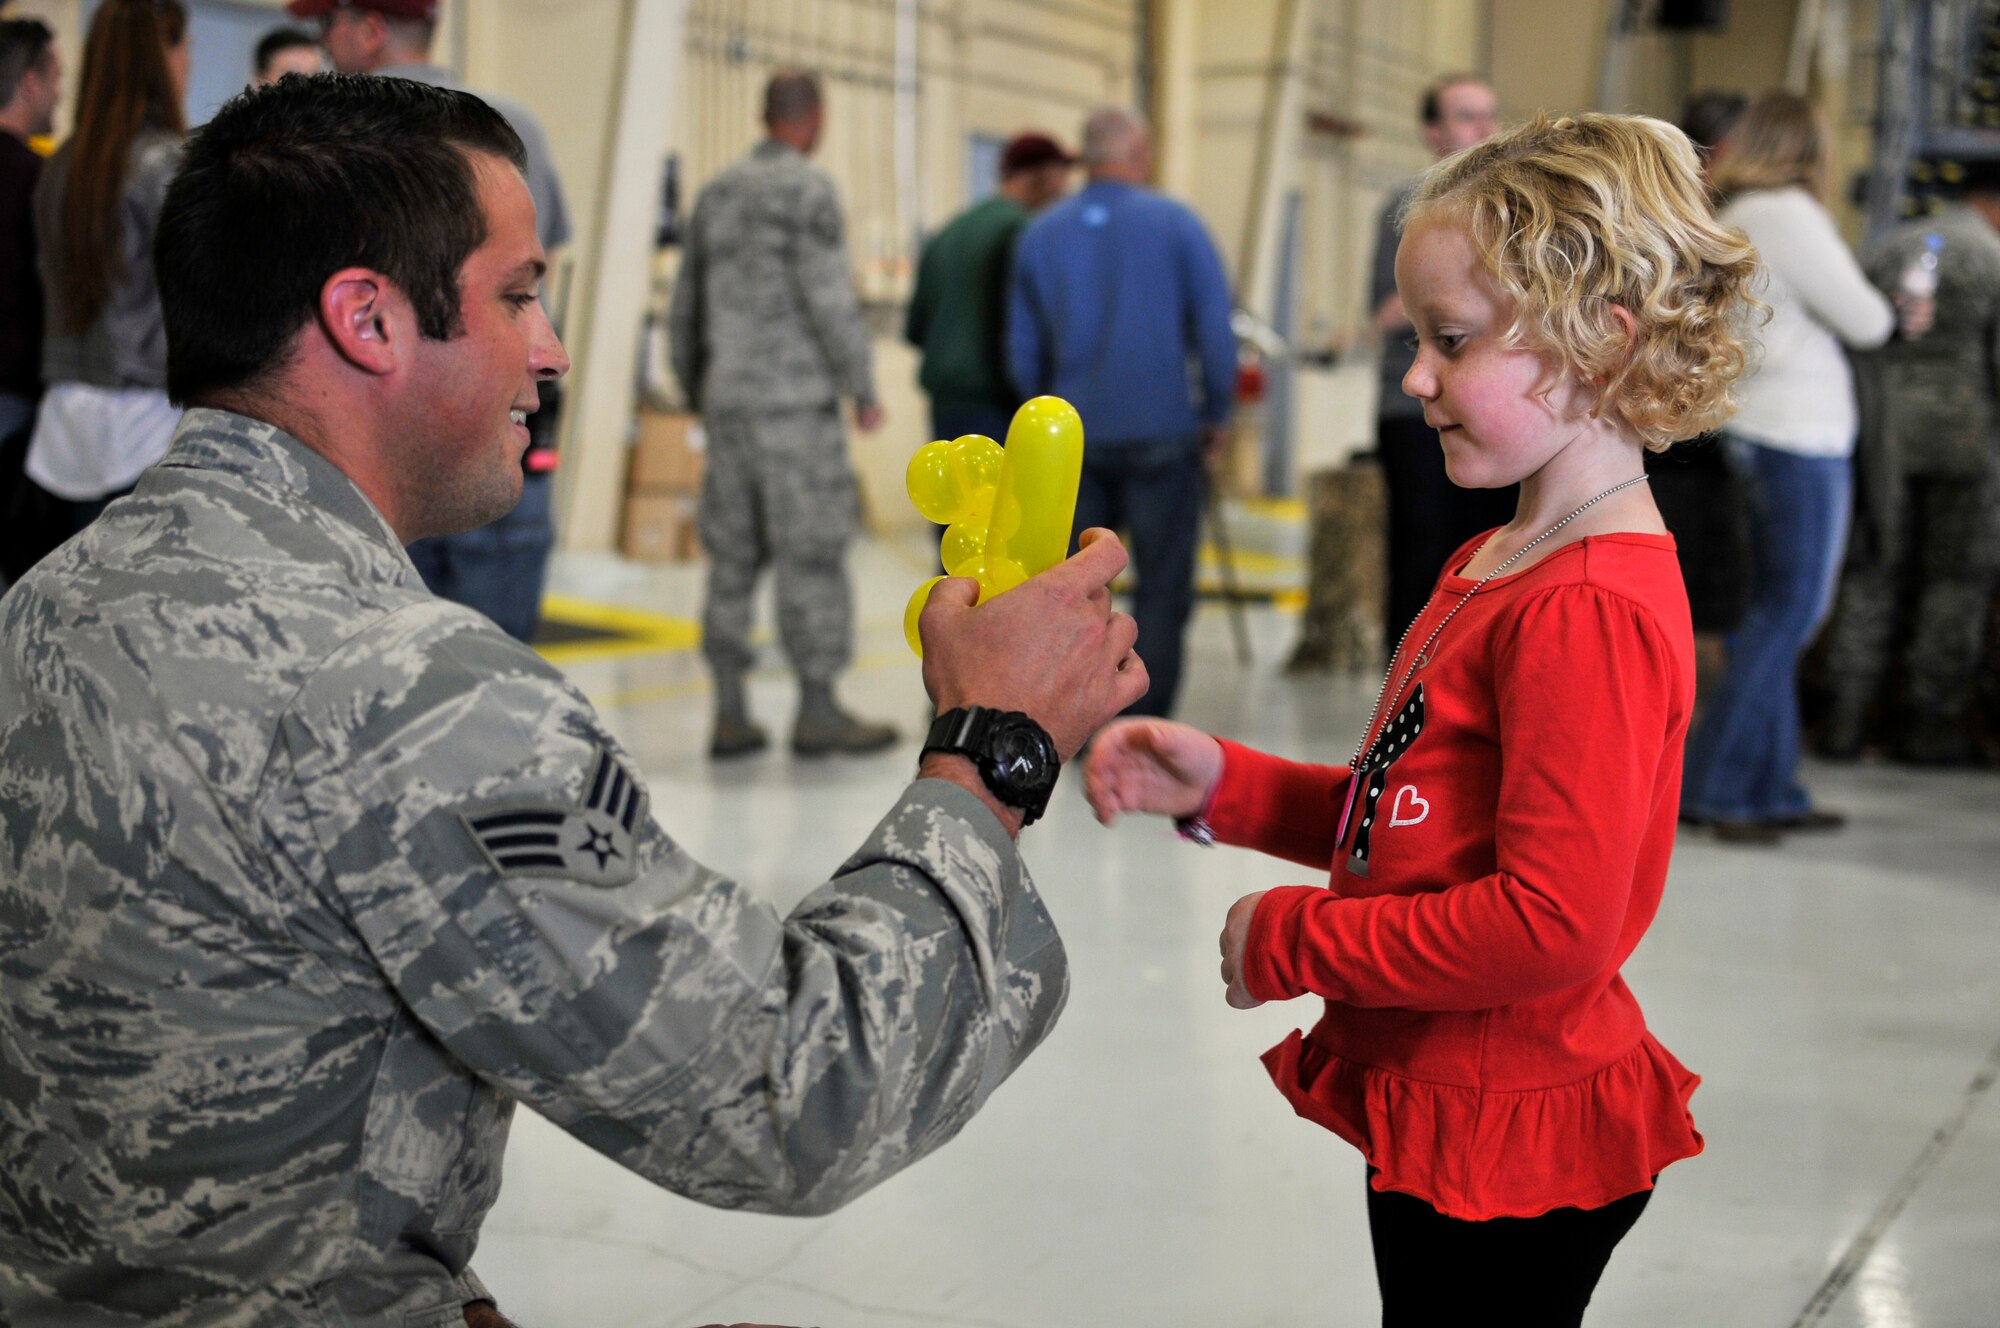 U.S. Air Force Senior Airman Lance A. Liggett, tactical air control party specialist with the 169th Air Support Operations Squadron, Illinois Air National Guard, makes Mallory an animal balloon during Wingman and Family Day at the 182nd Airlift Wing, Peoria, Ill., Sept. 12, 2015. The event was organized to promote resiliency in Airmen and their friends and family. (U.S. Air National Guard photo by Staff Sgt. Lealan Buehrer/Released)